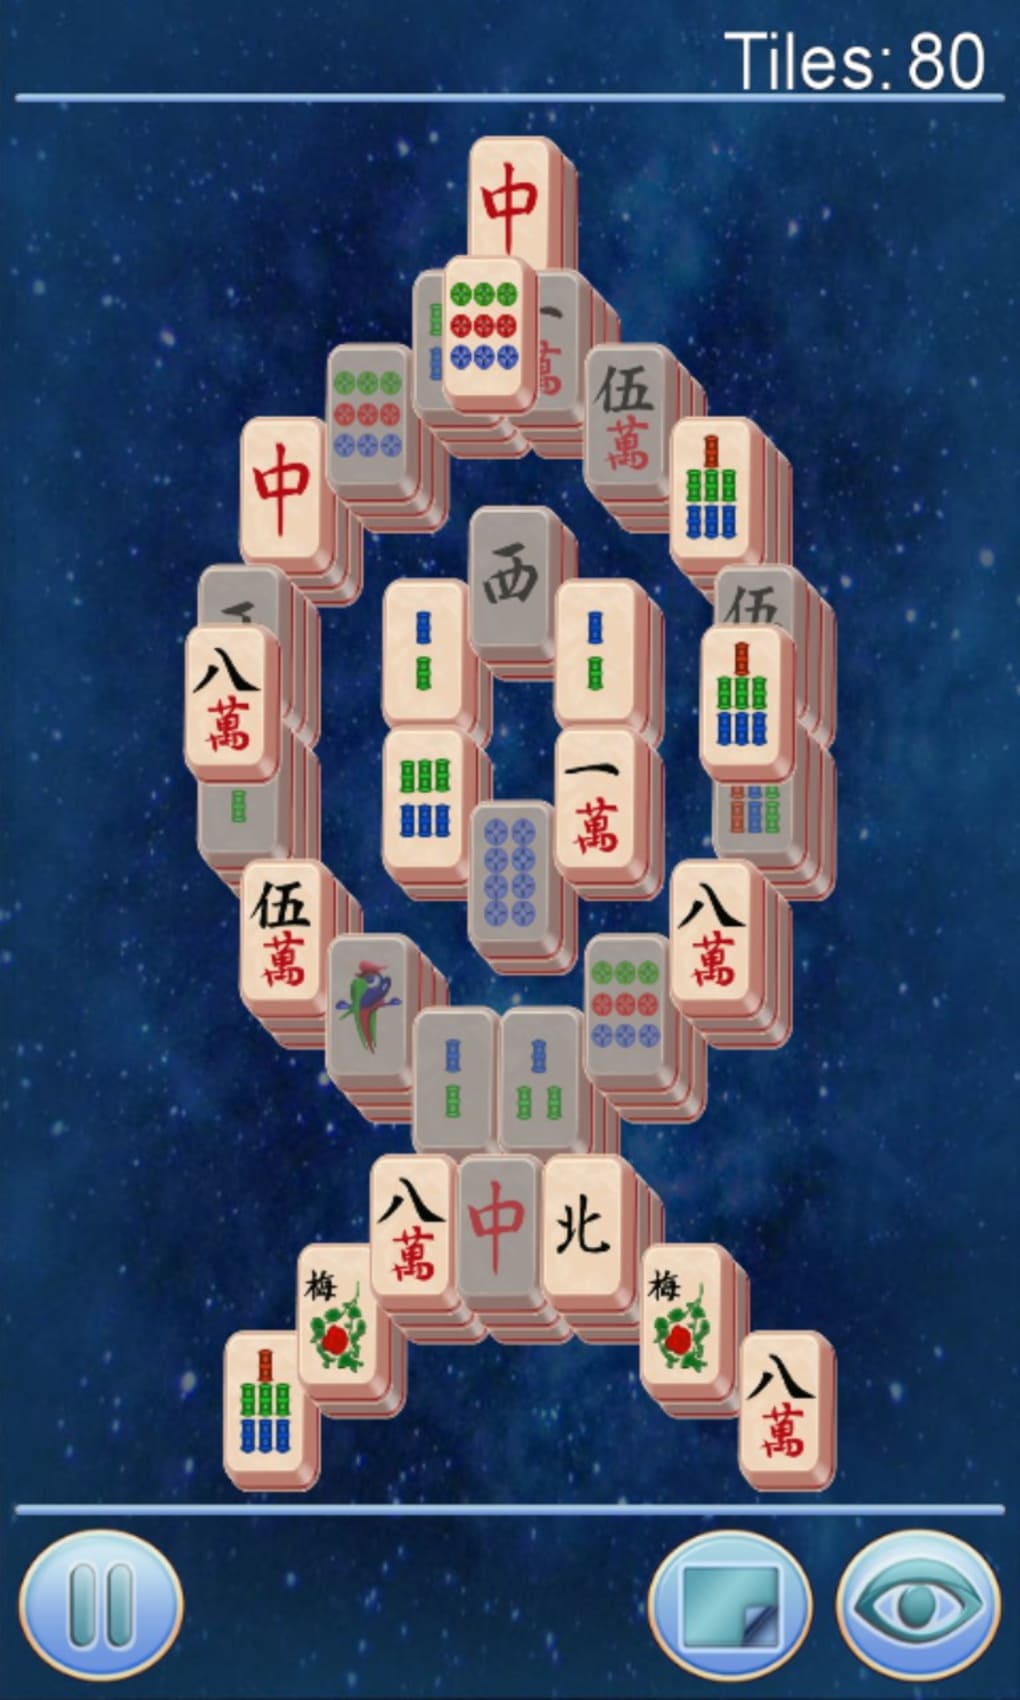 Mahjong King download the last version for ios